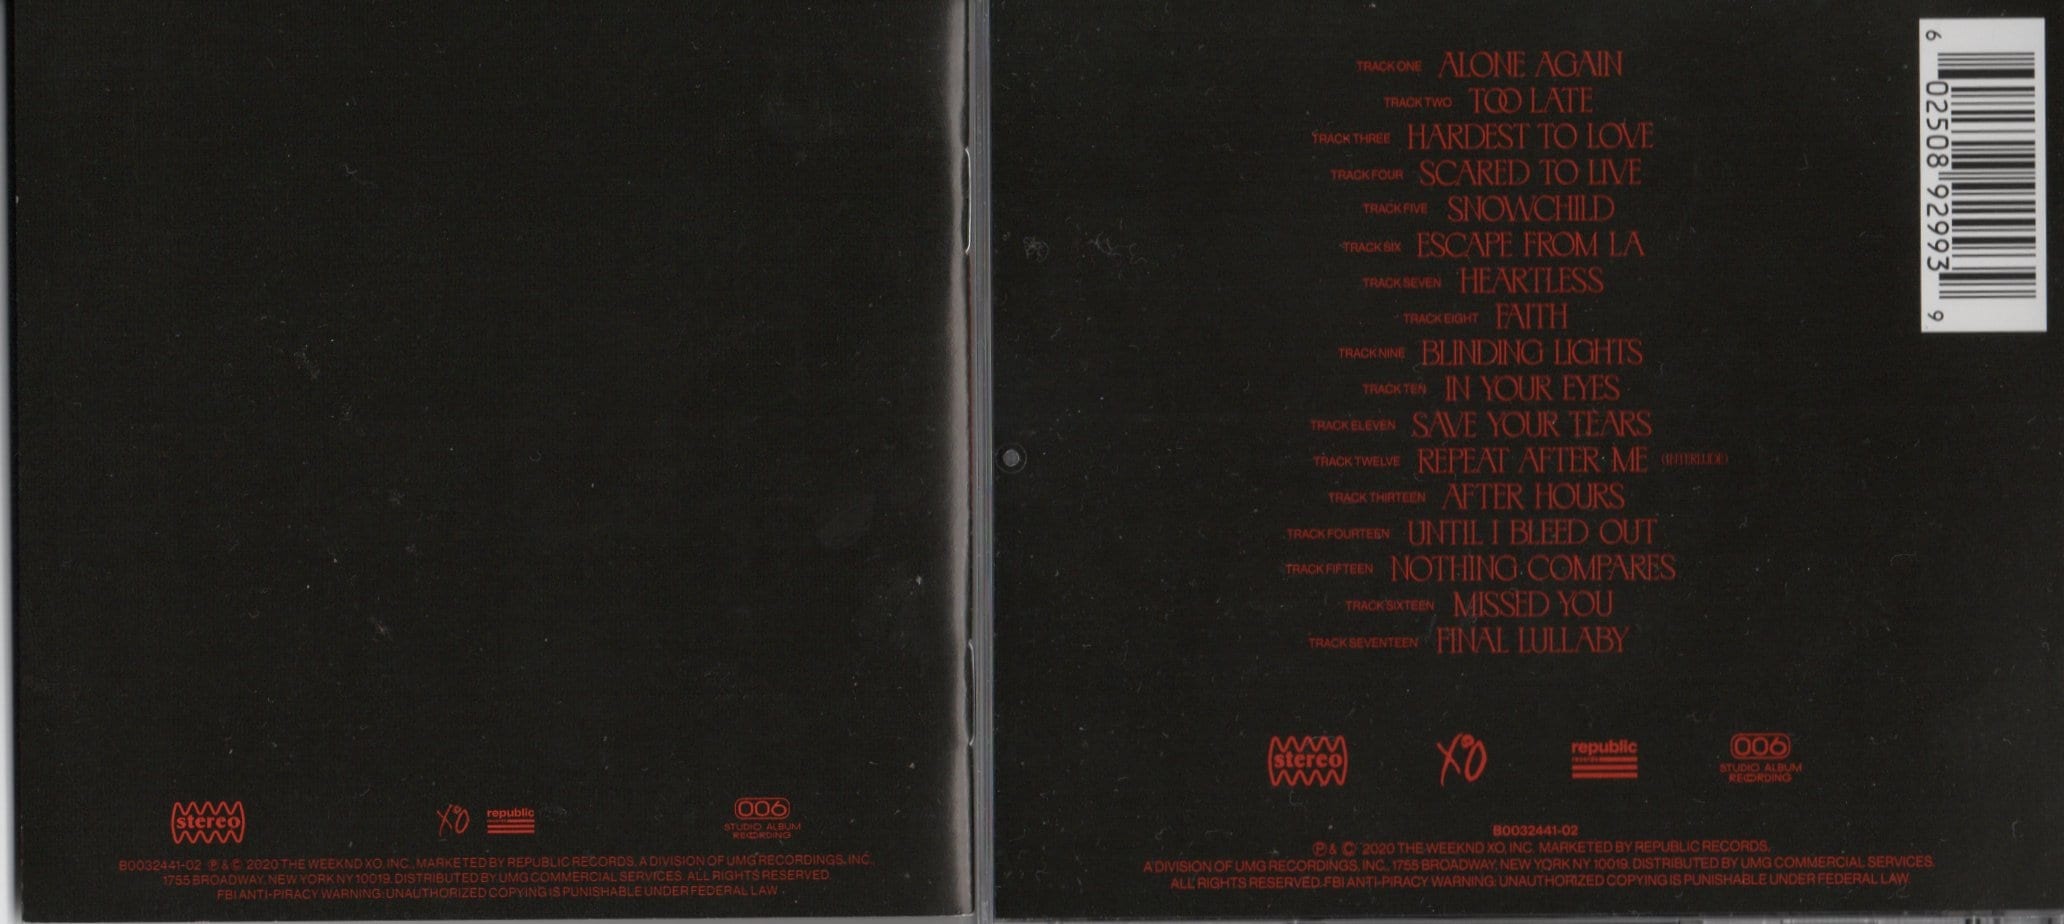 The Weeknd After Hours CD Deluxe Limited Edition BOOKLET AUTOGRAFATO -   Italia